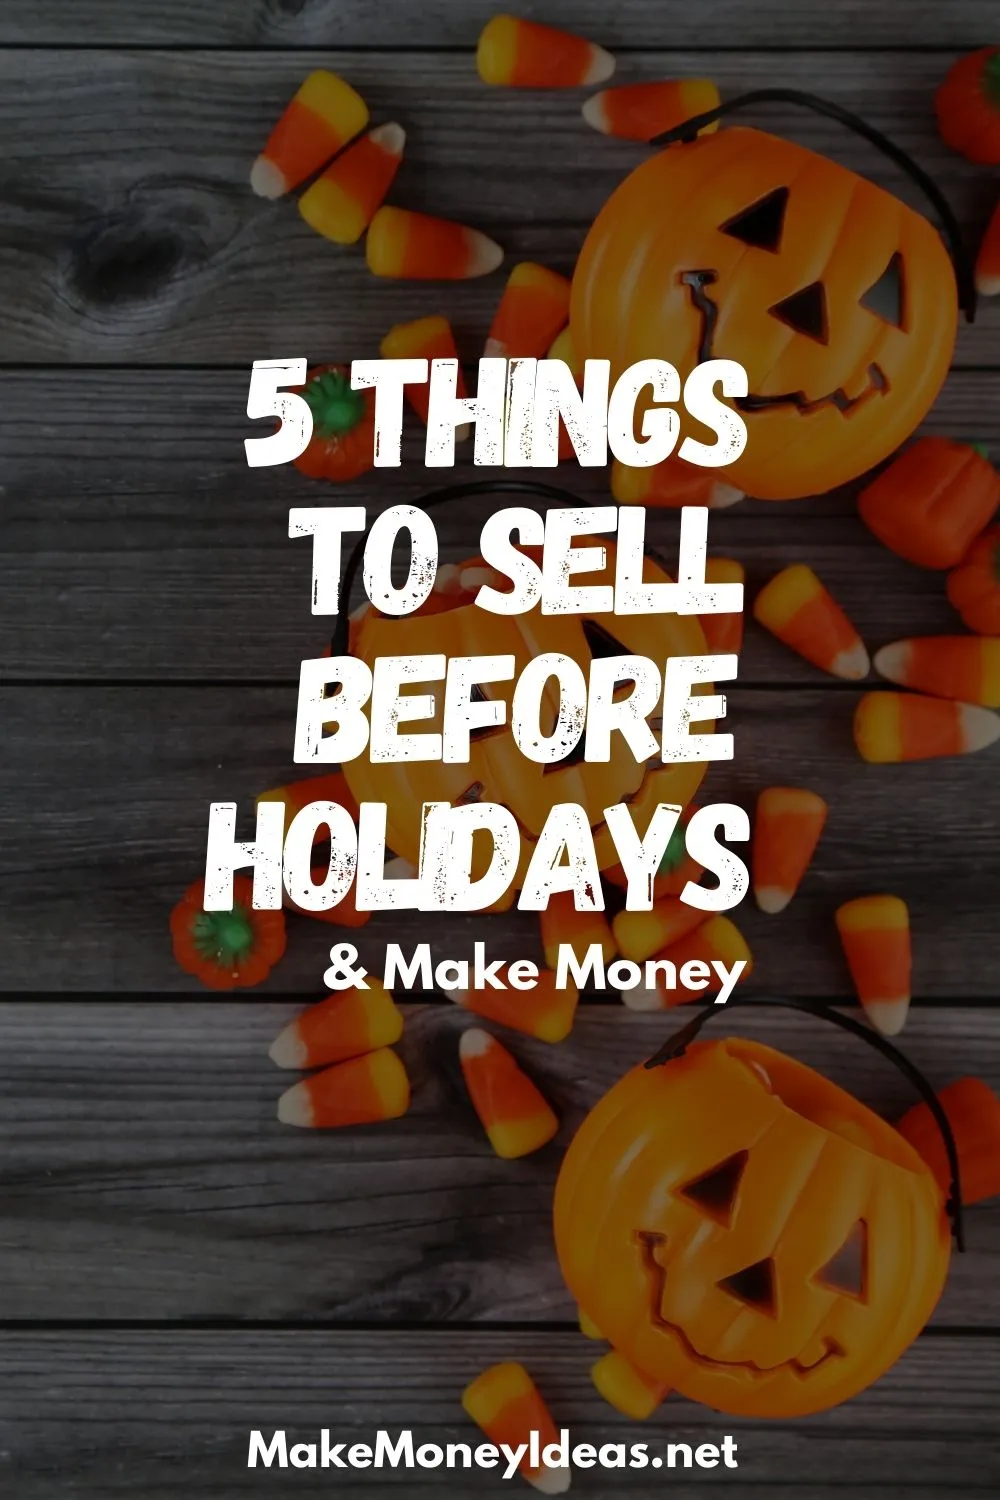 5 things to sell before holidays